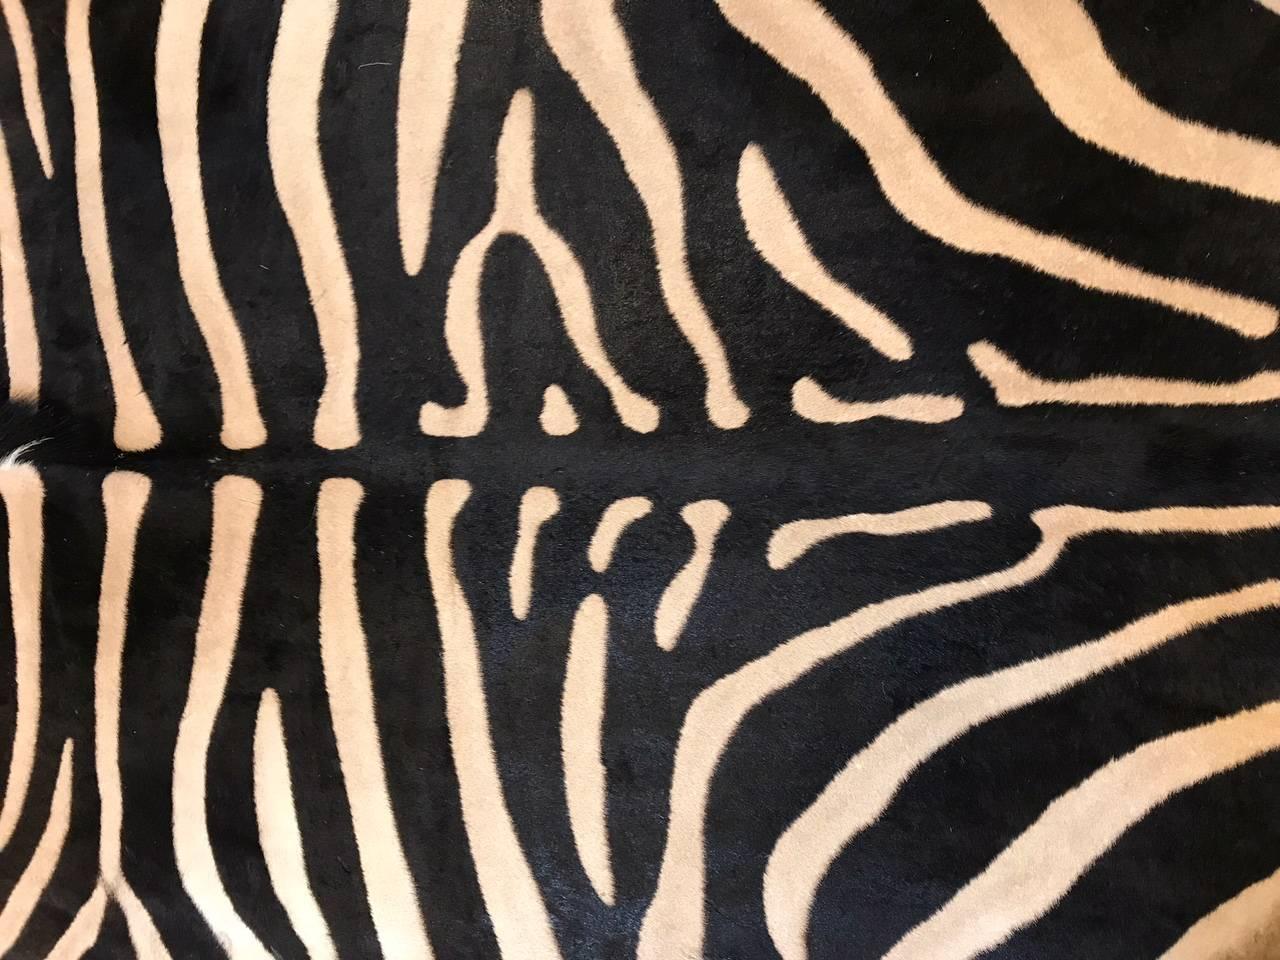 Beautiful grade “A” zebra skin rug lined with canvas and finished with leather trim.
Measures: 100